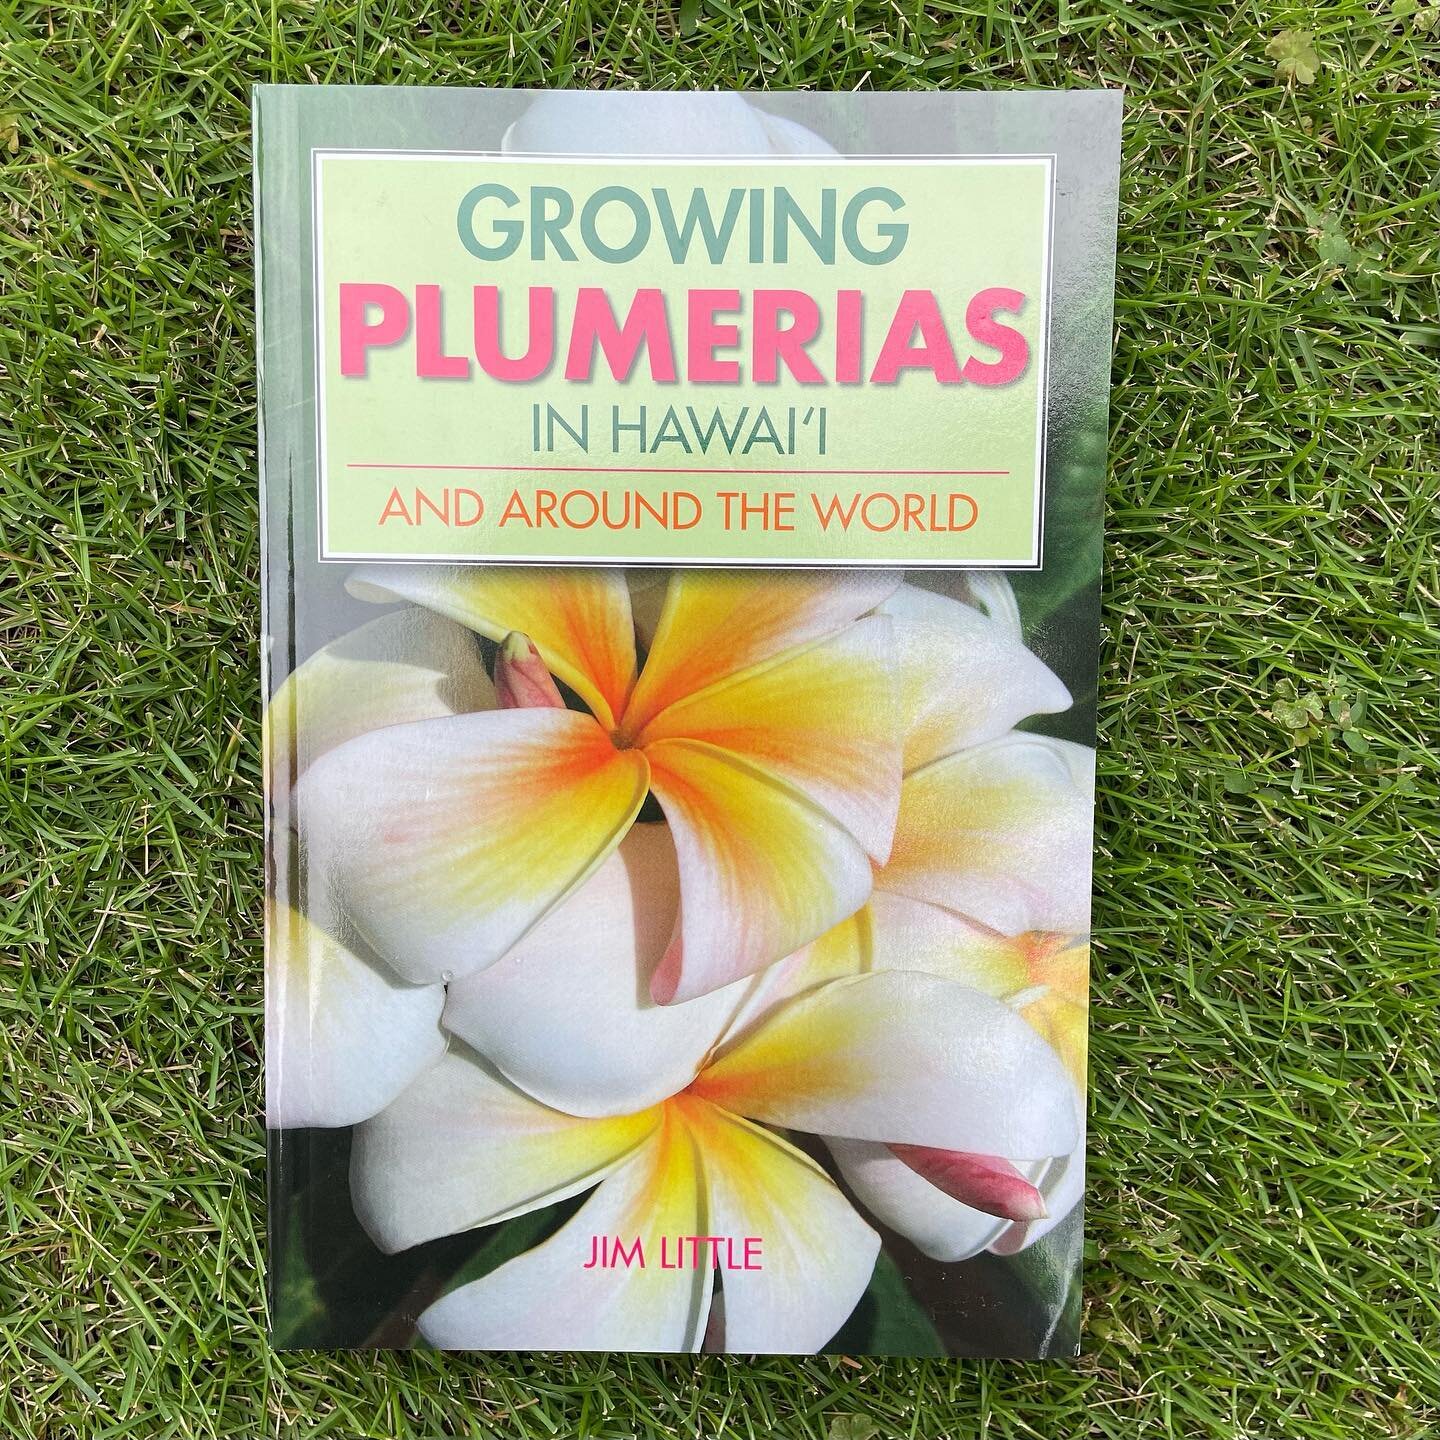 Autographed book available at www.JLPlumeriaHawaii.com 

サイン入り本入荷しました　
https://plumeria.theshop.jp